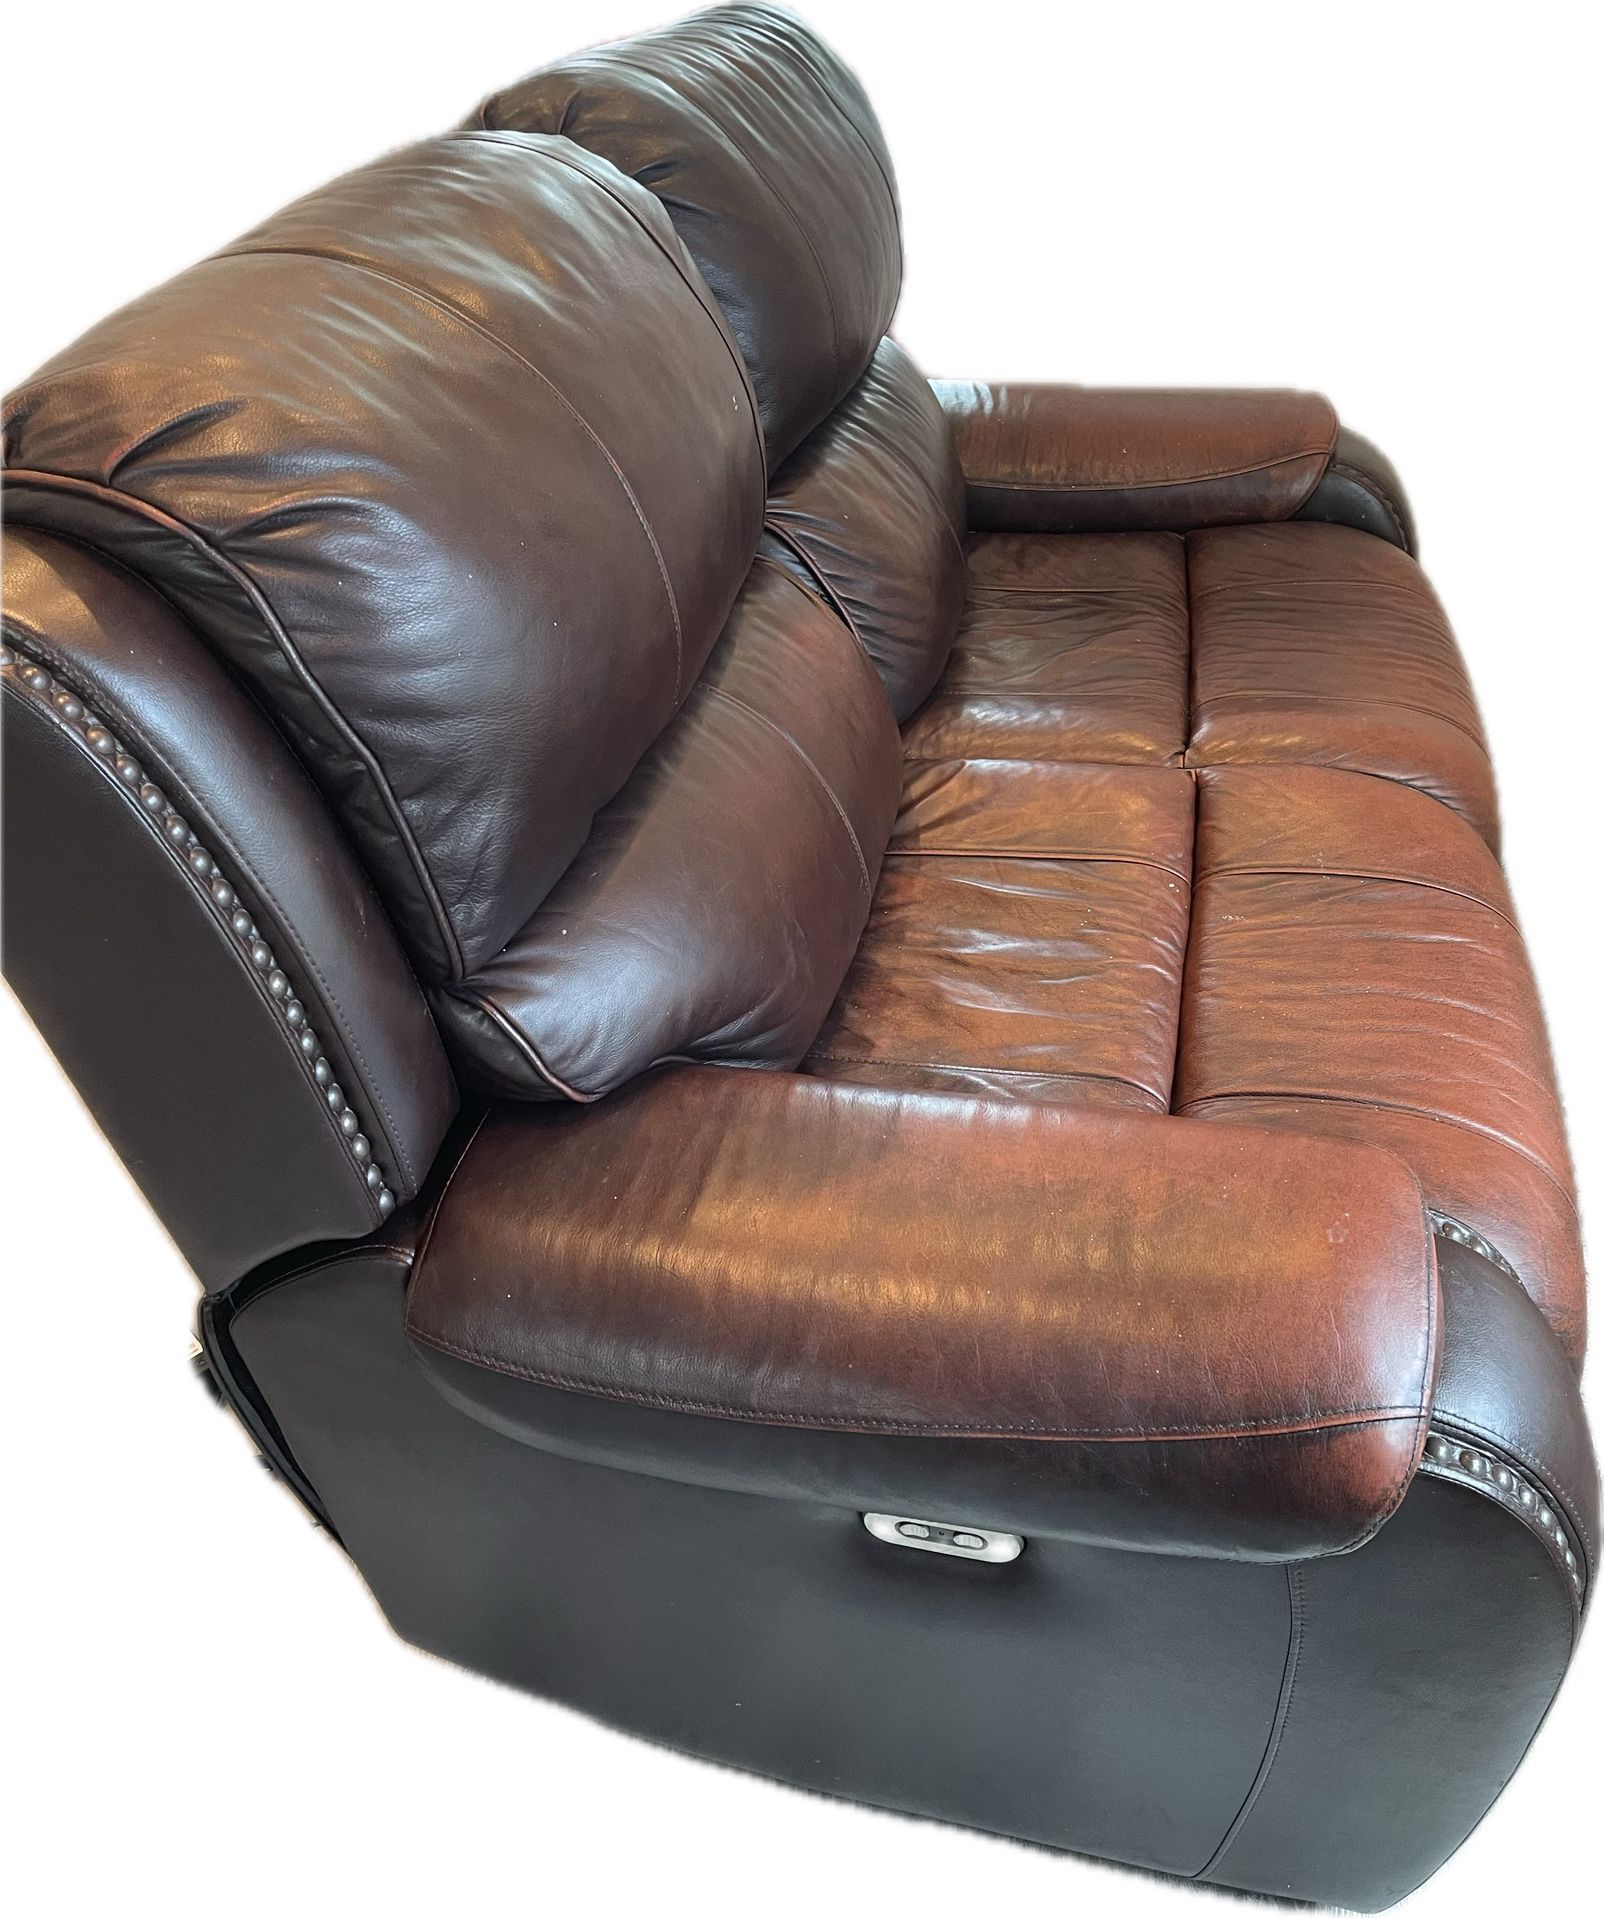 Leather Recliners Loveseat